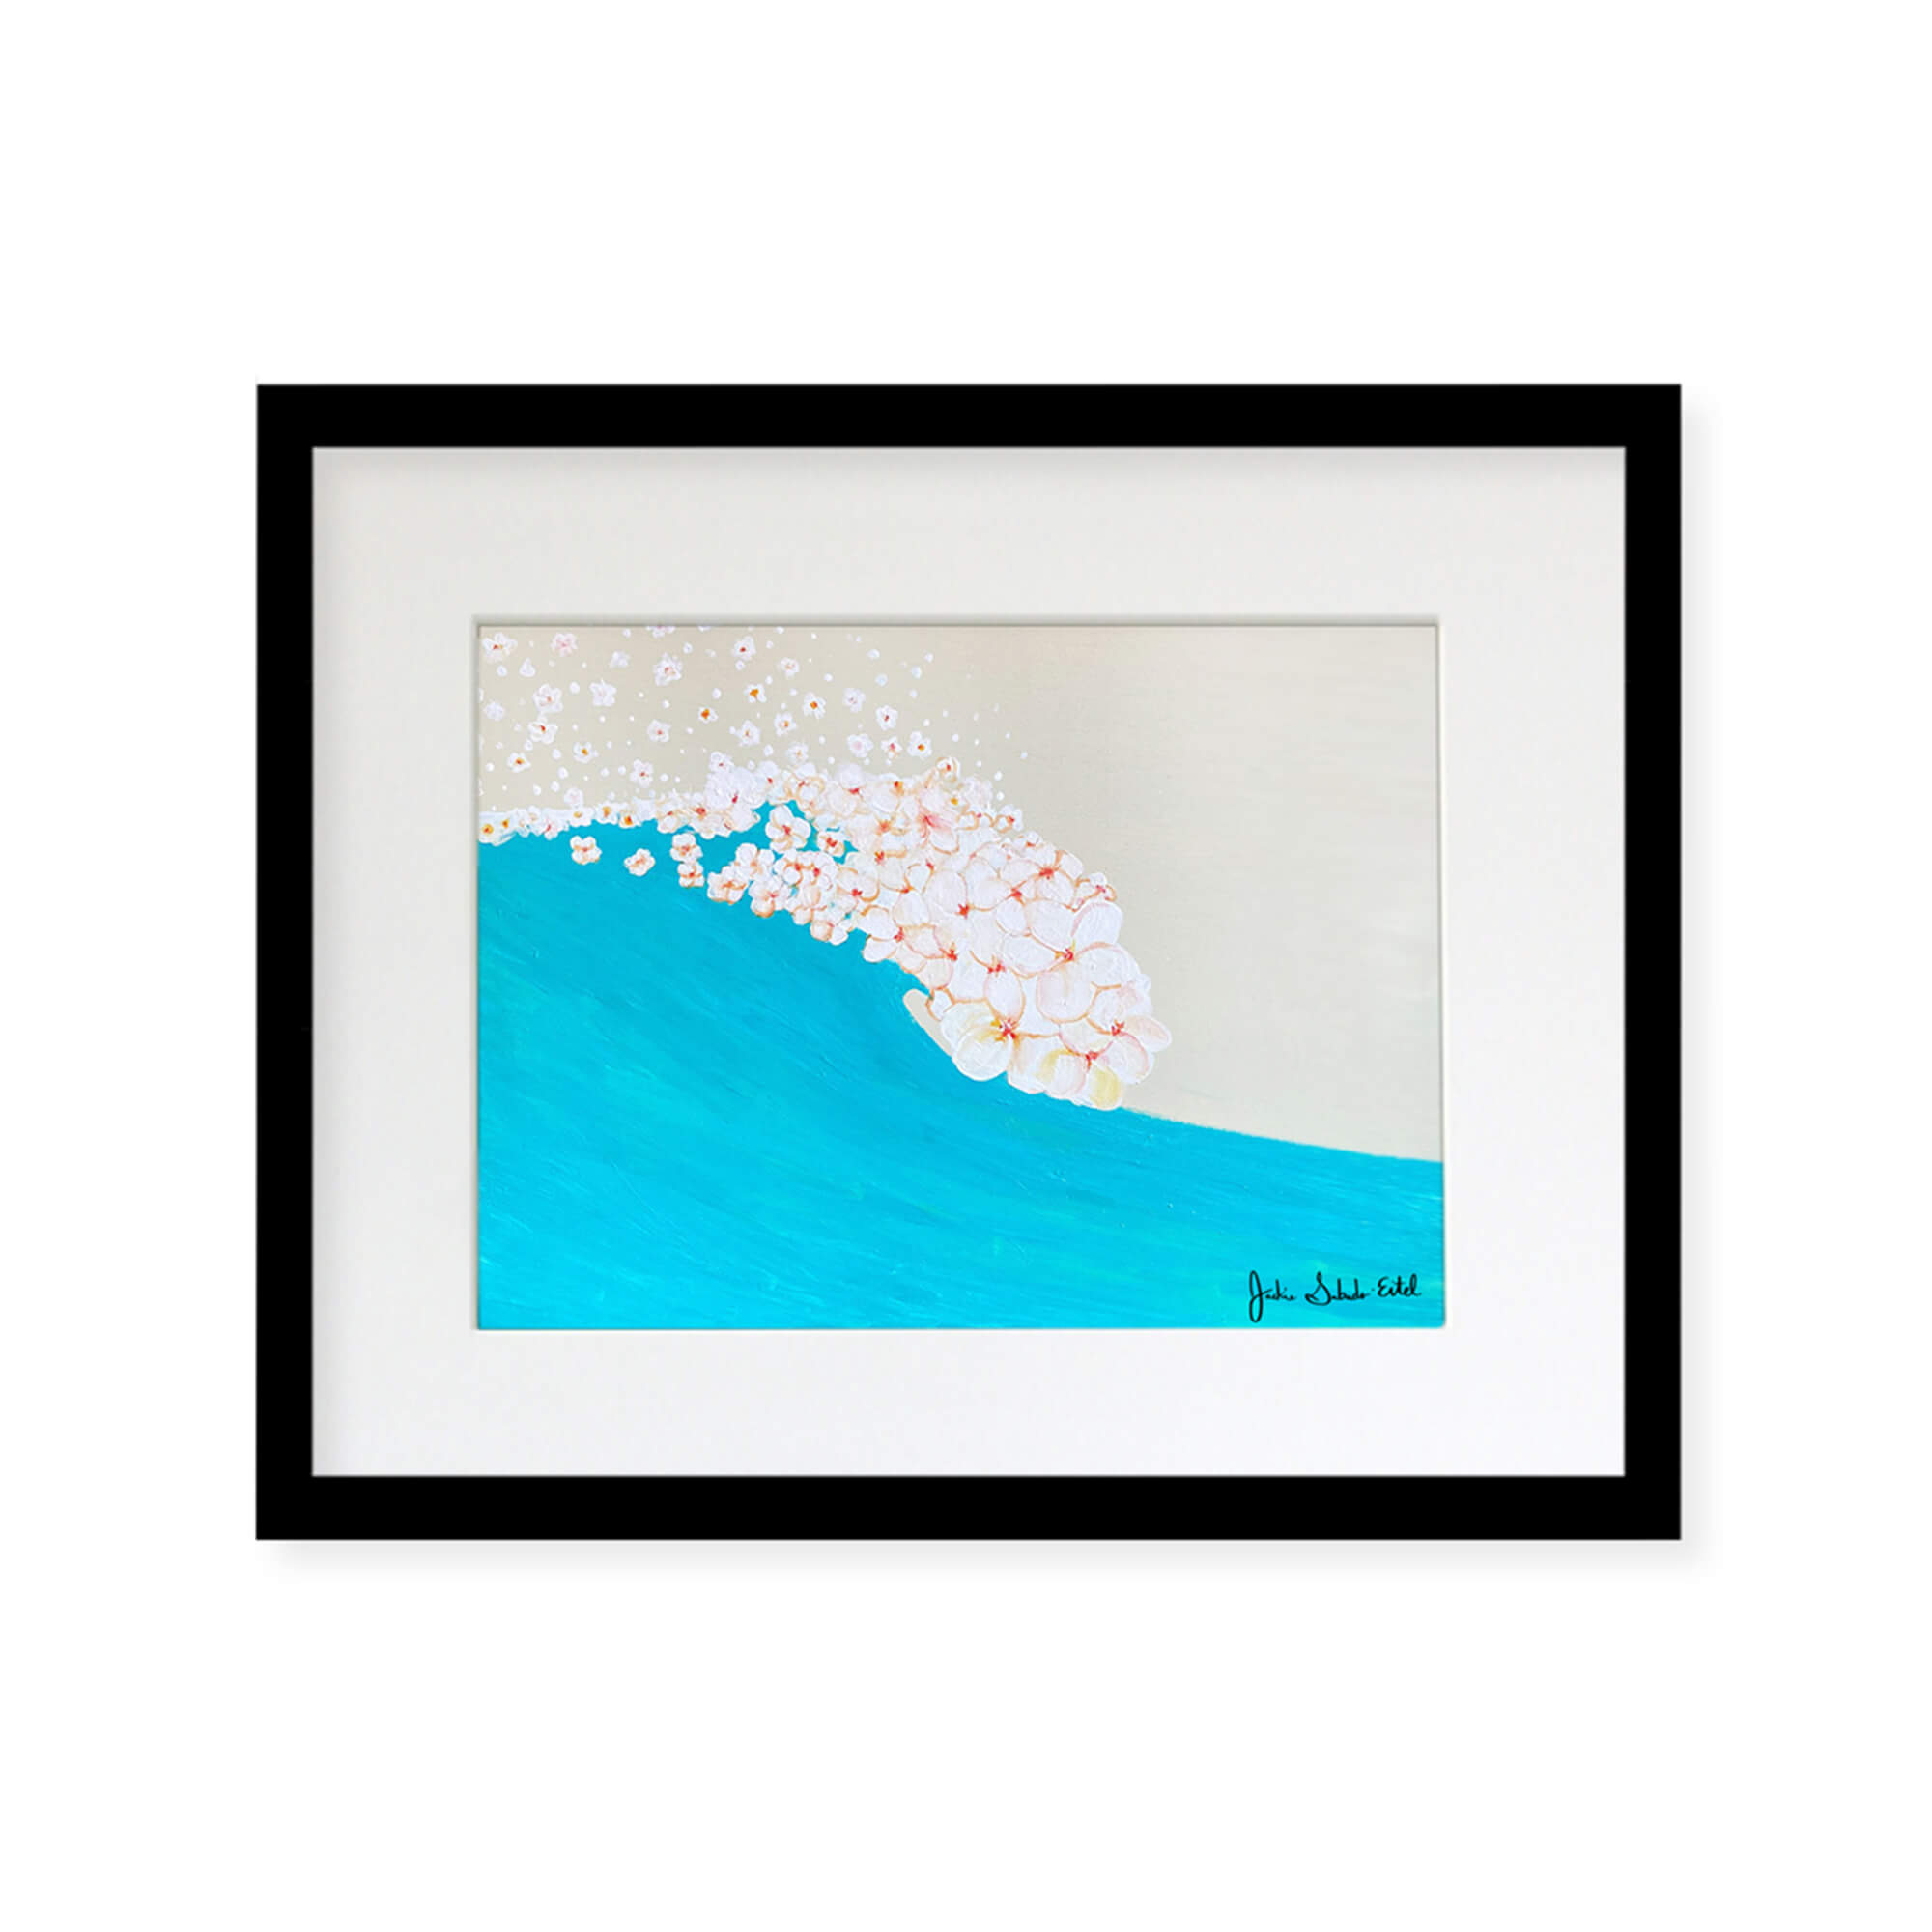 A framed matted art print featuring a top view of a shore with plumeria flowers as waves by Hawaii artist Jackie Eitel